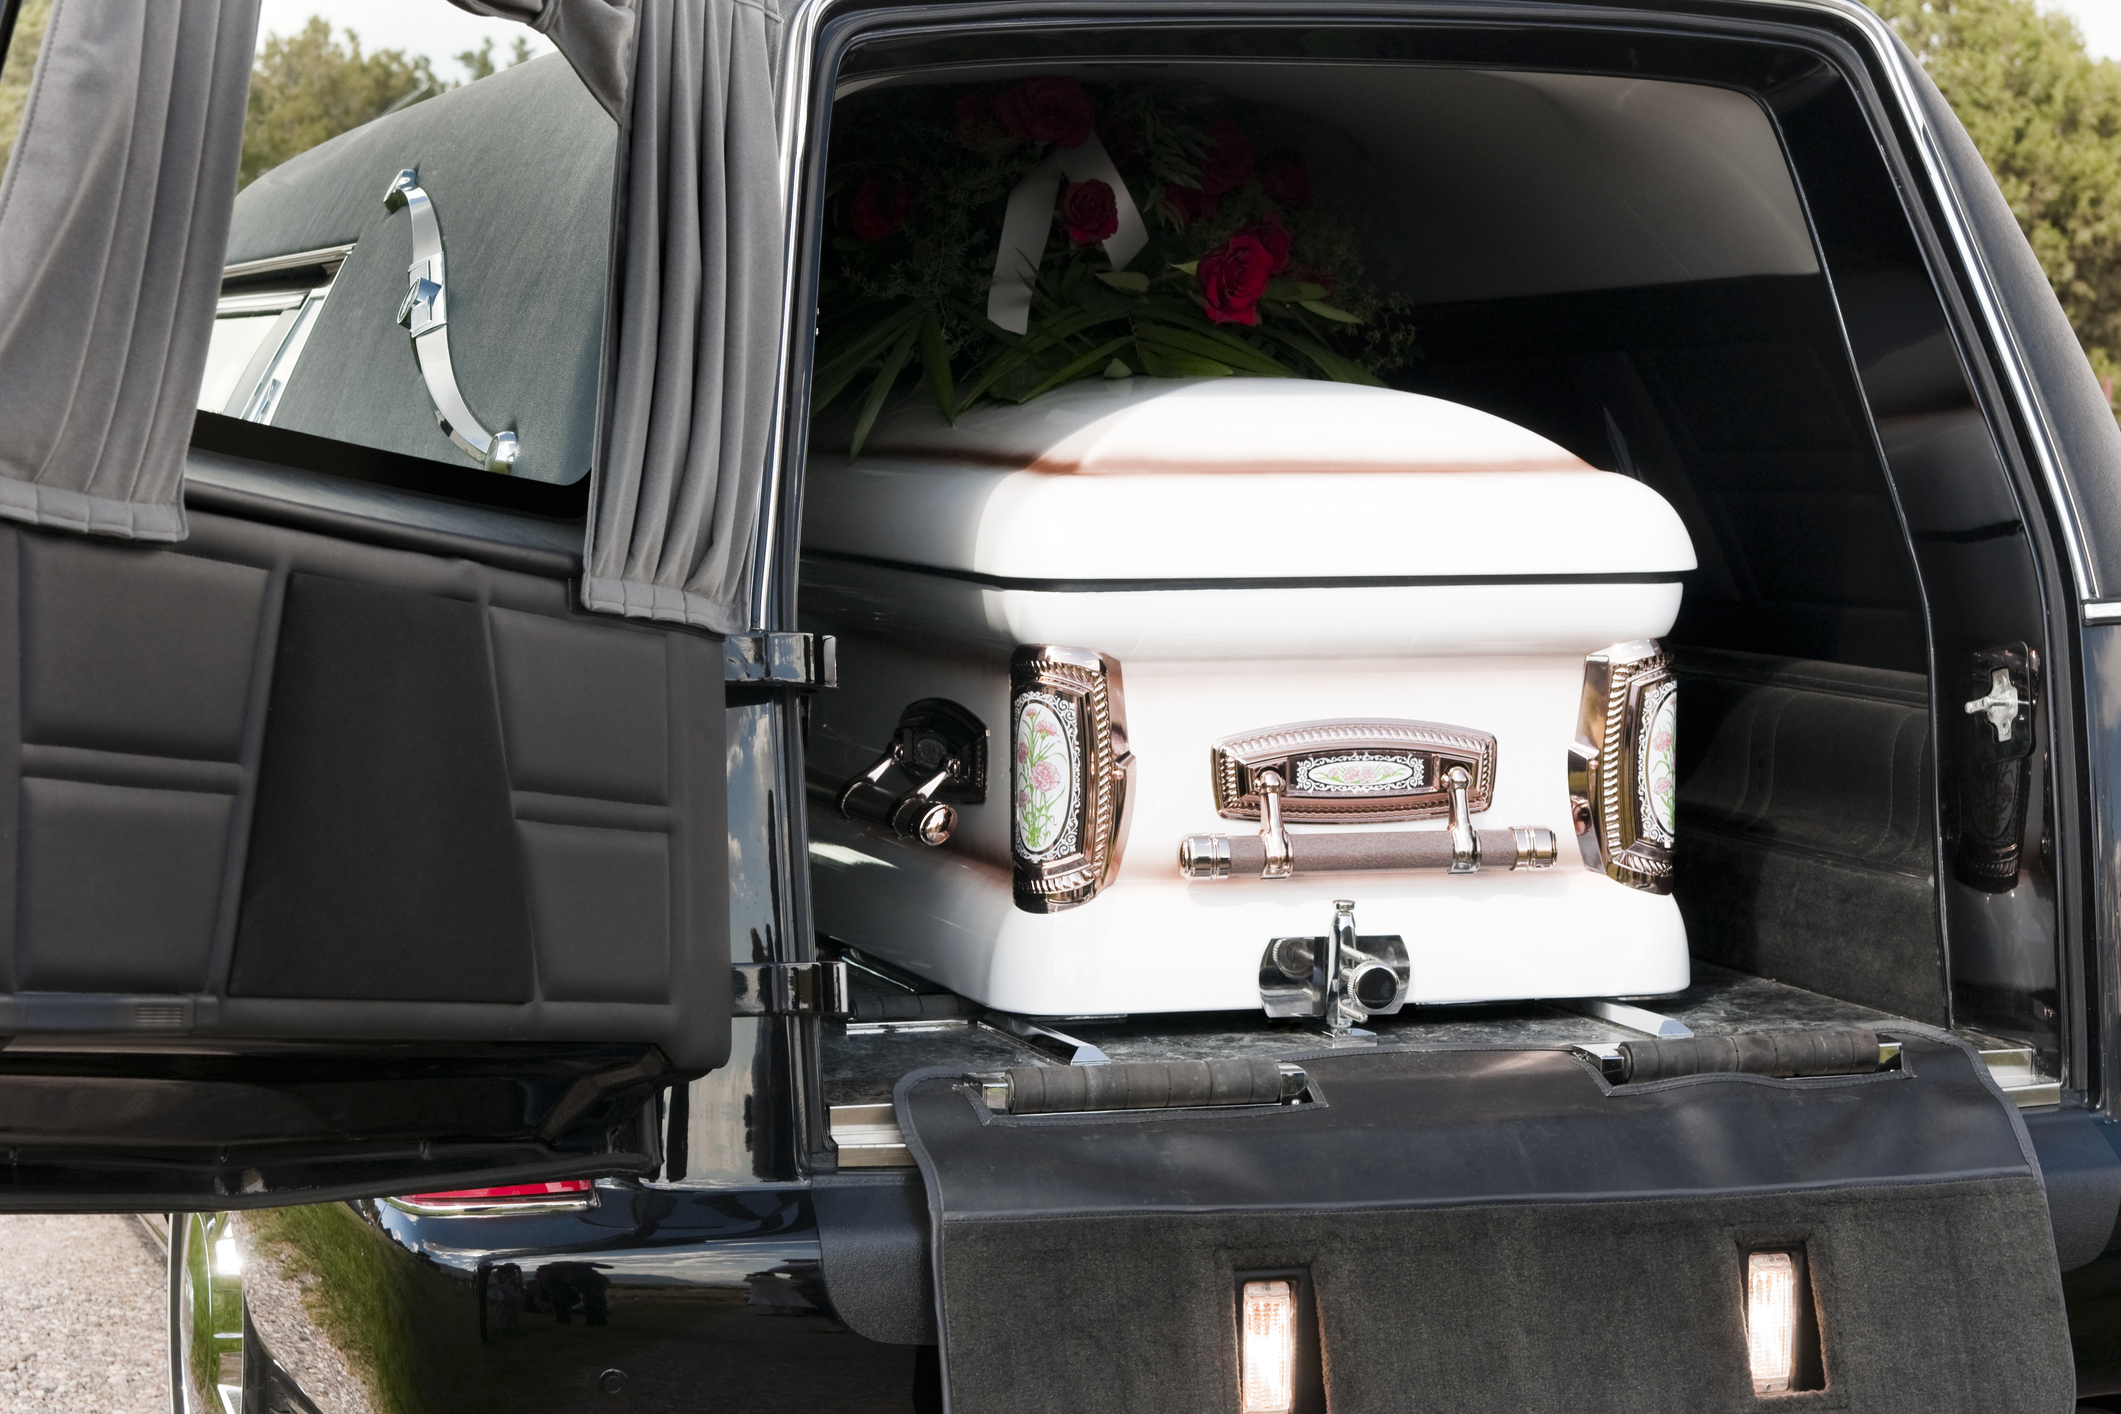 A hearse with its rear door open, displaying a white casket adorned with flowers inside